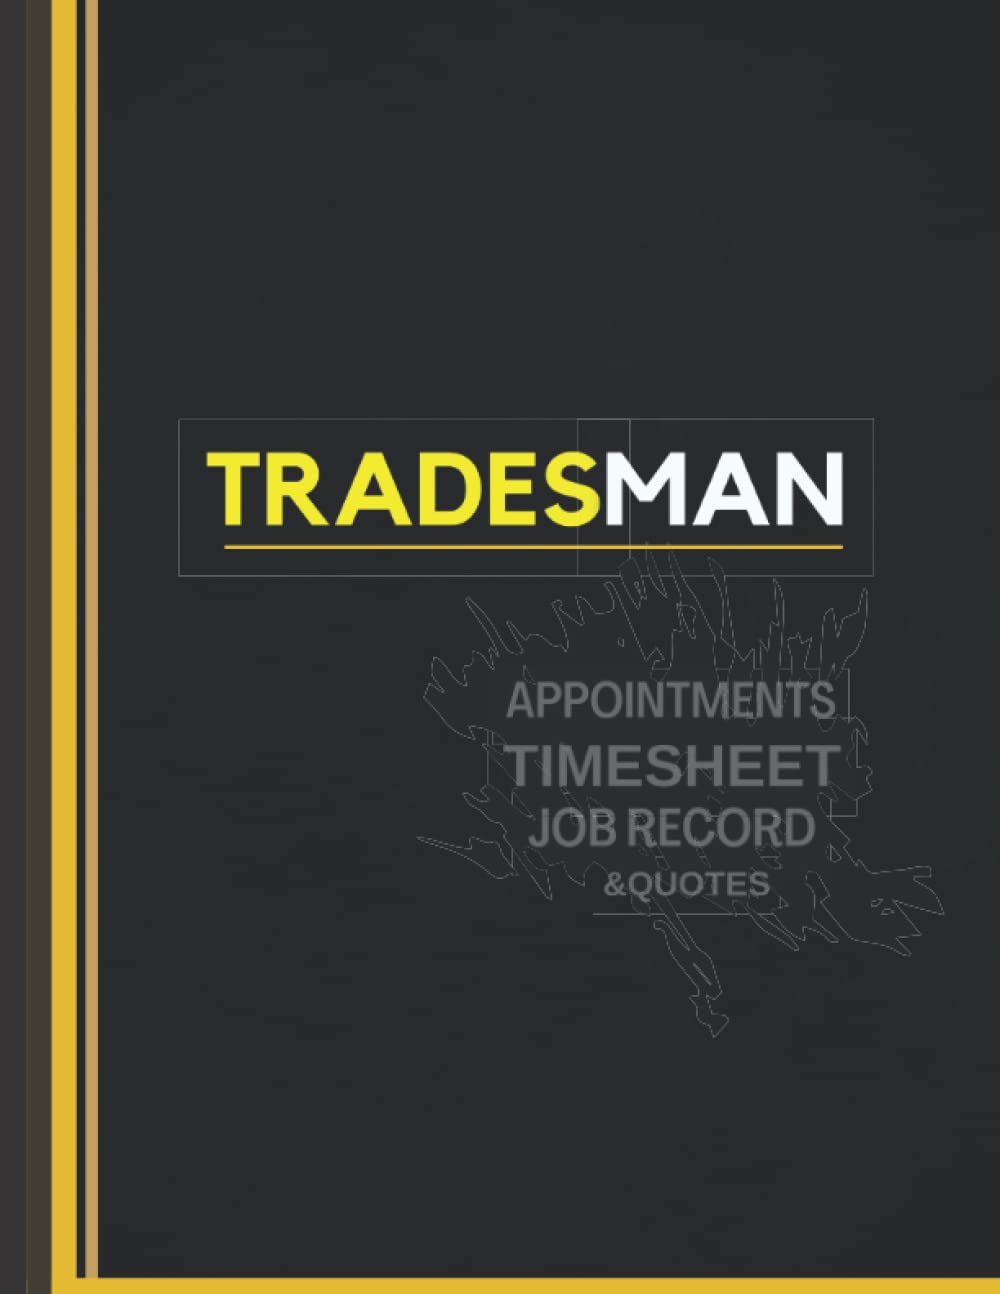 Tradesman Notebook Planner: Daily Appointments Schedule, Jobs Record, Customer Details, Materials List & Estimated Quotes|For Contractors| Self ... Timeslots (8am - 8pm) |Timesheet Log Book| A4